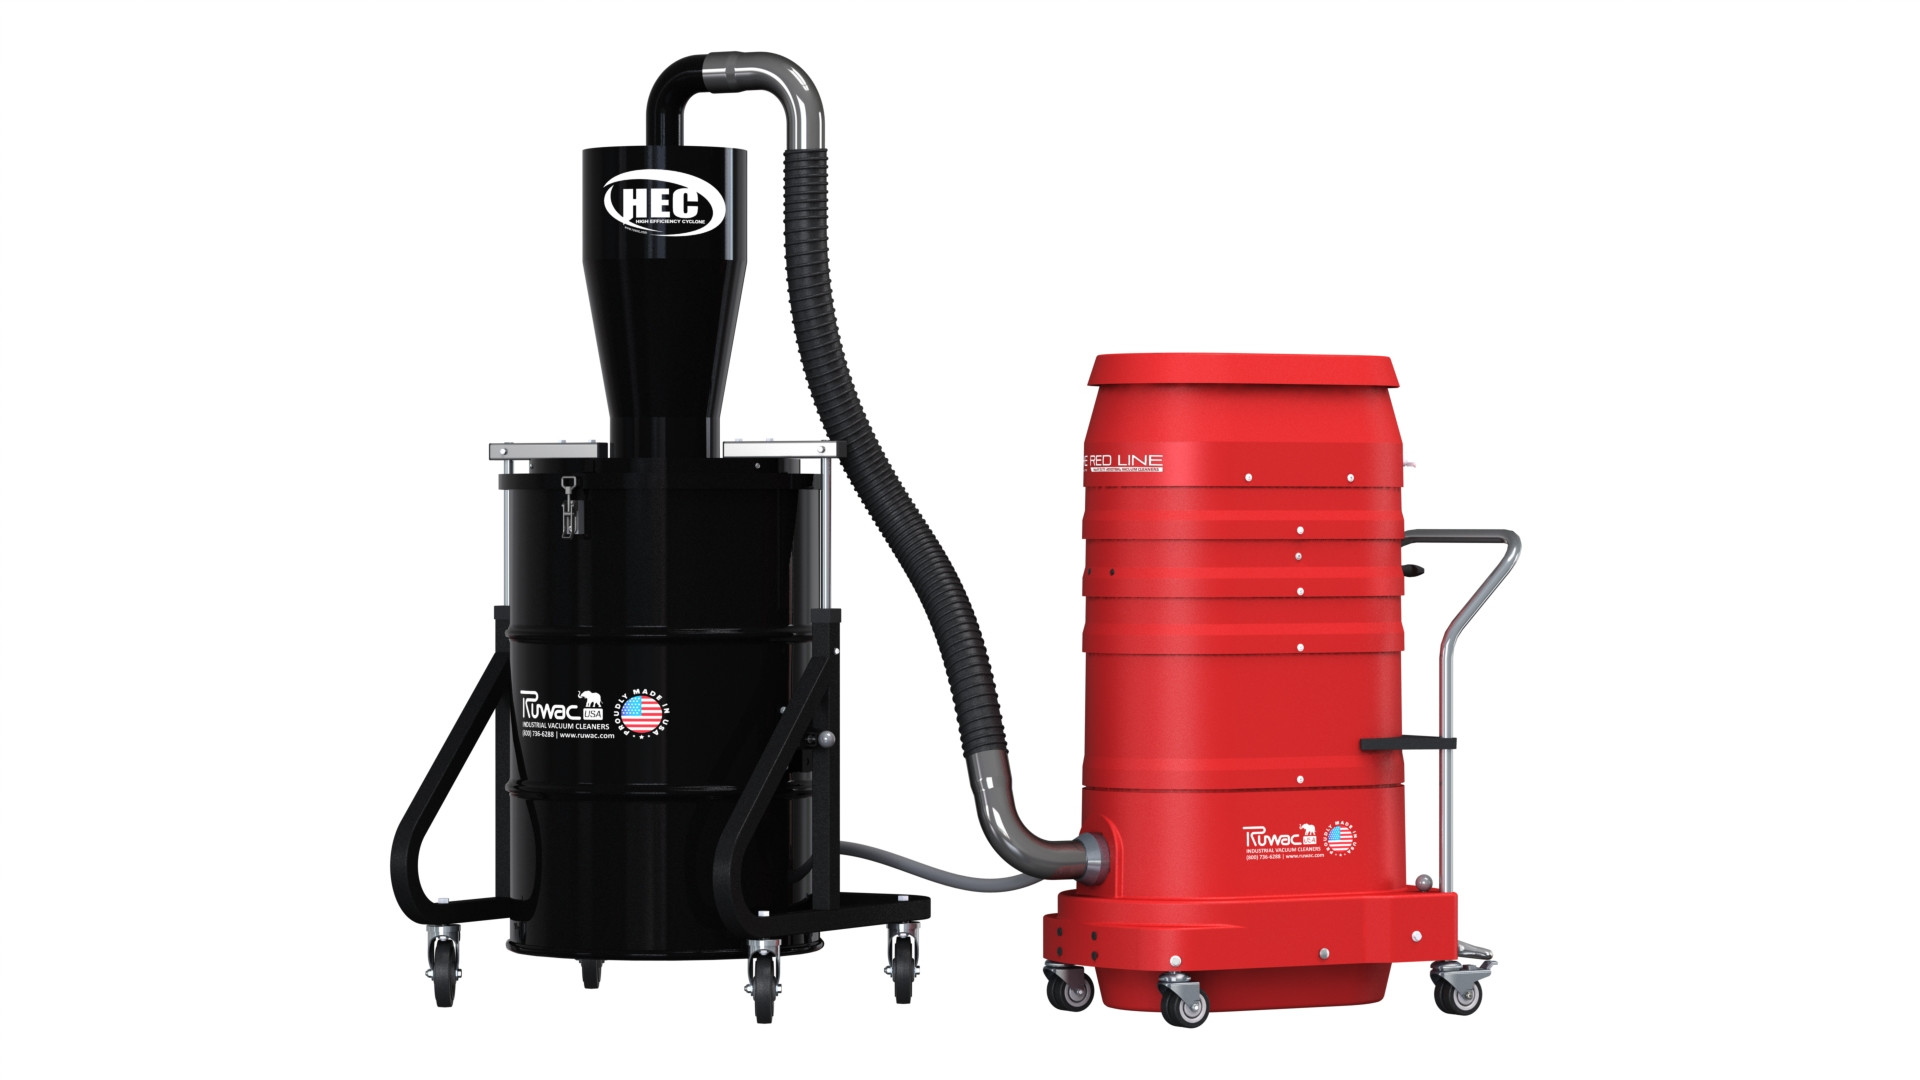 best hardwood floor cleaning machines vacuums of hepa mold vacuum cleaner manufacturer ruwac usa in download attic vac vermiculite removal system